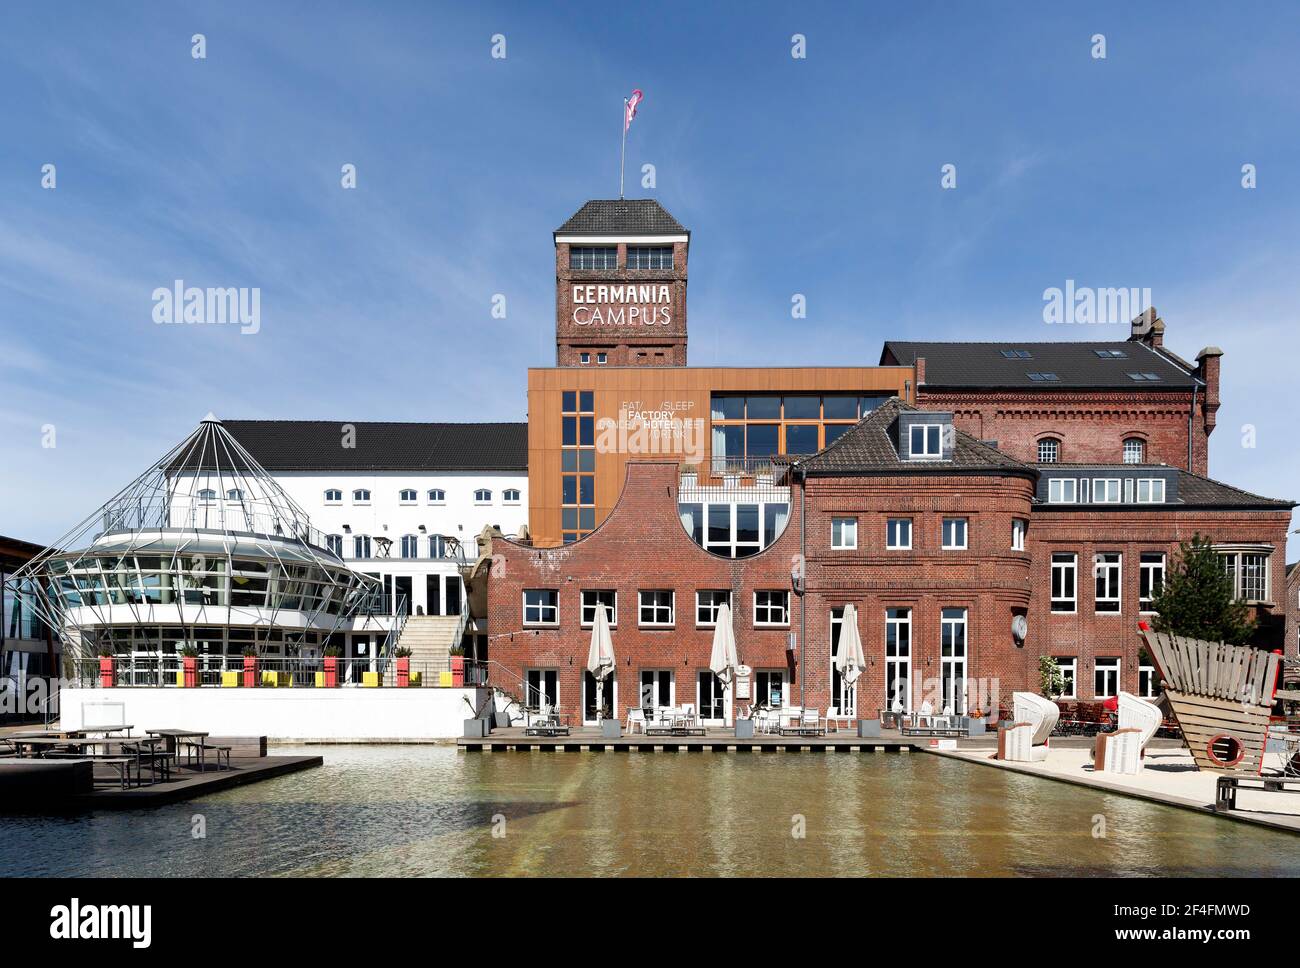 Germania brewery from 1898, today city quarter Germania-Campus with residential and commercial buildings, hotel, gastronomy, leisure and health Stock Photo